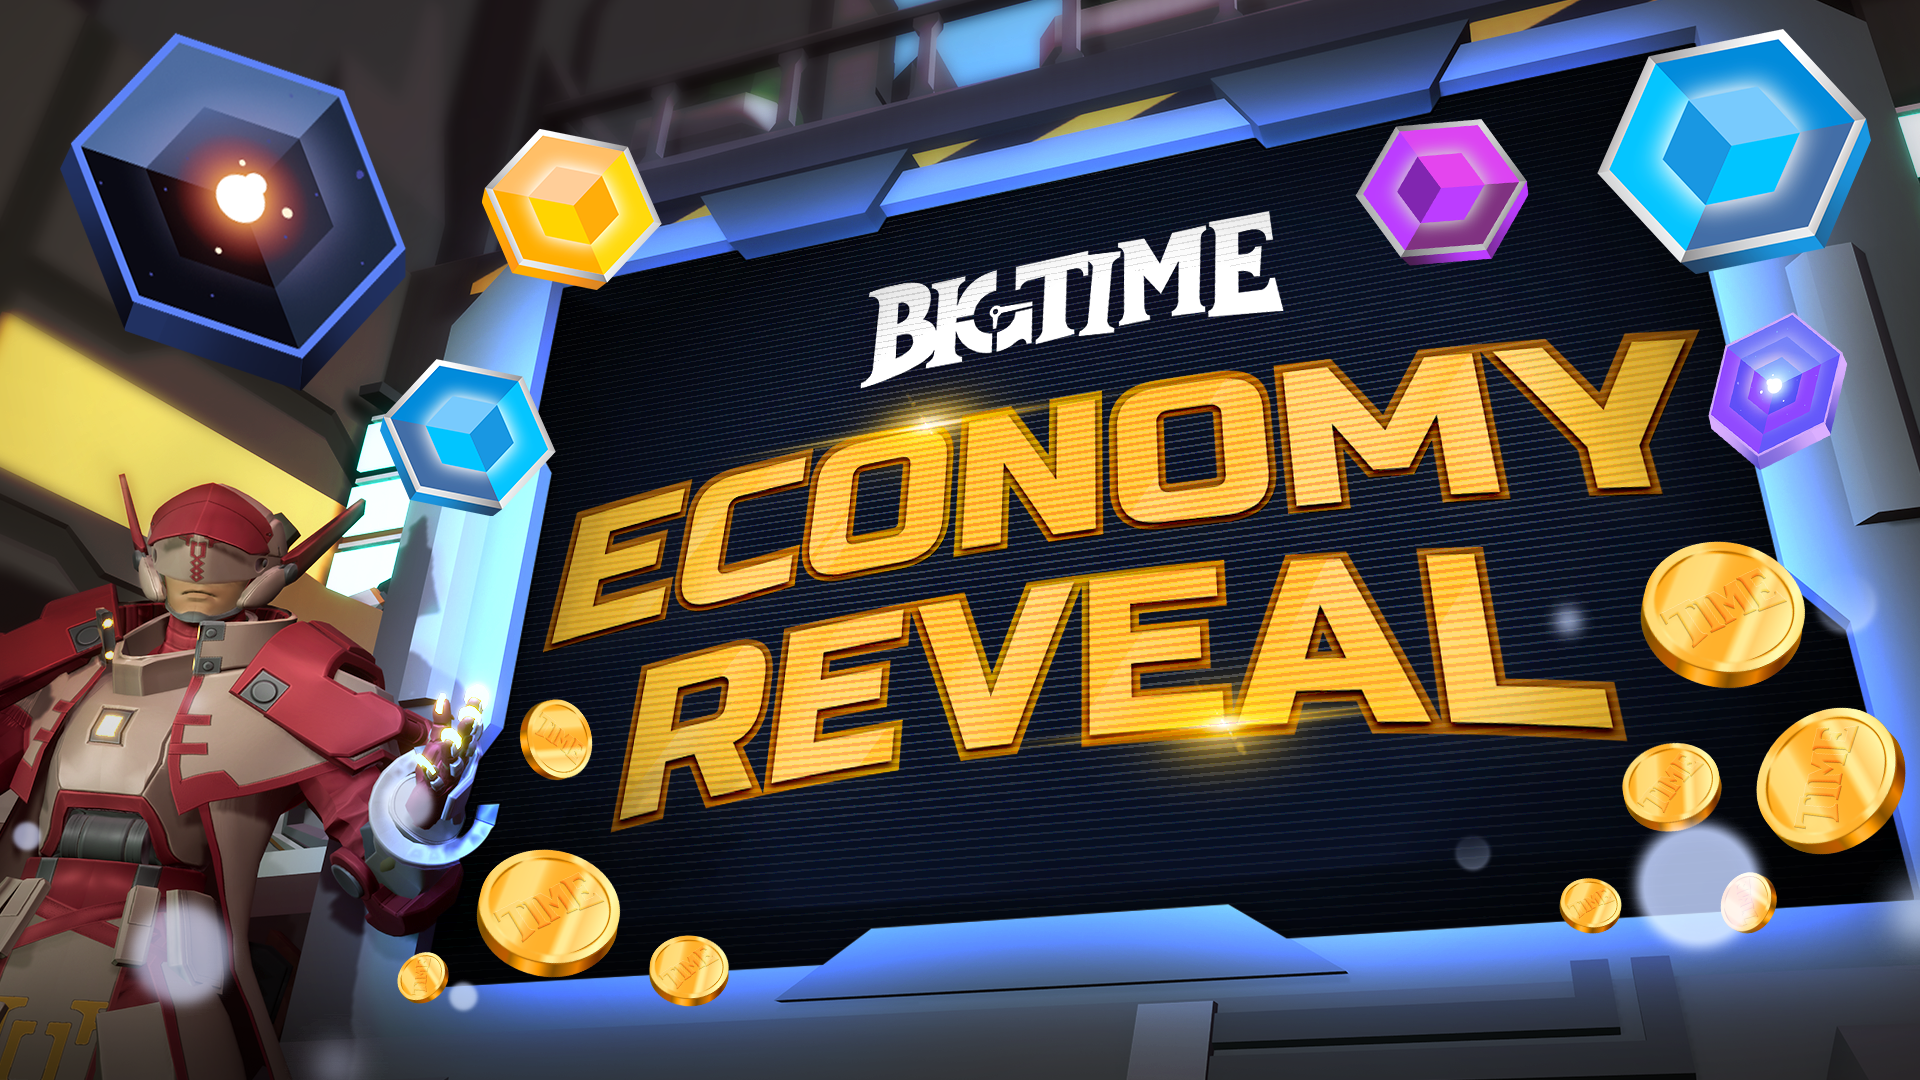 Big Time Economy Explained: All You Need to Know